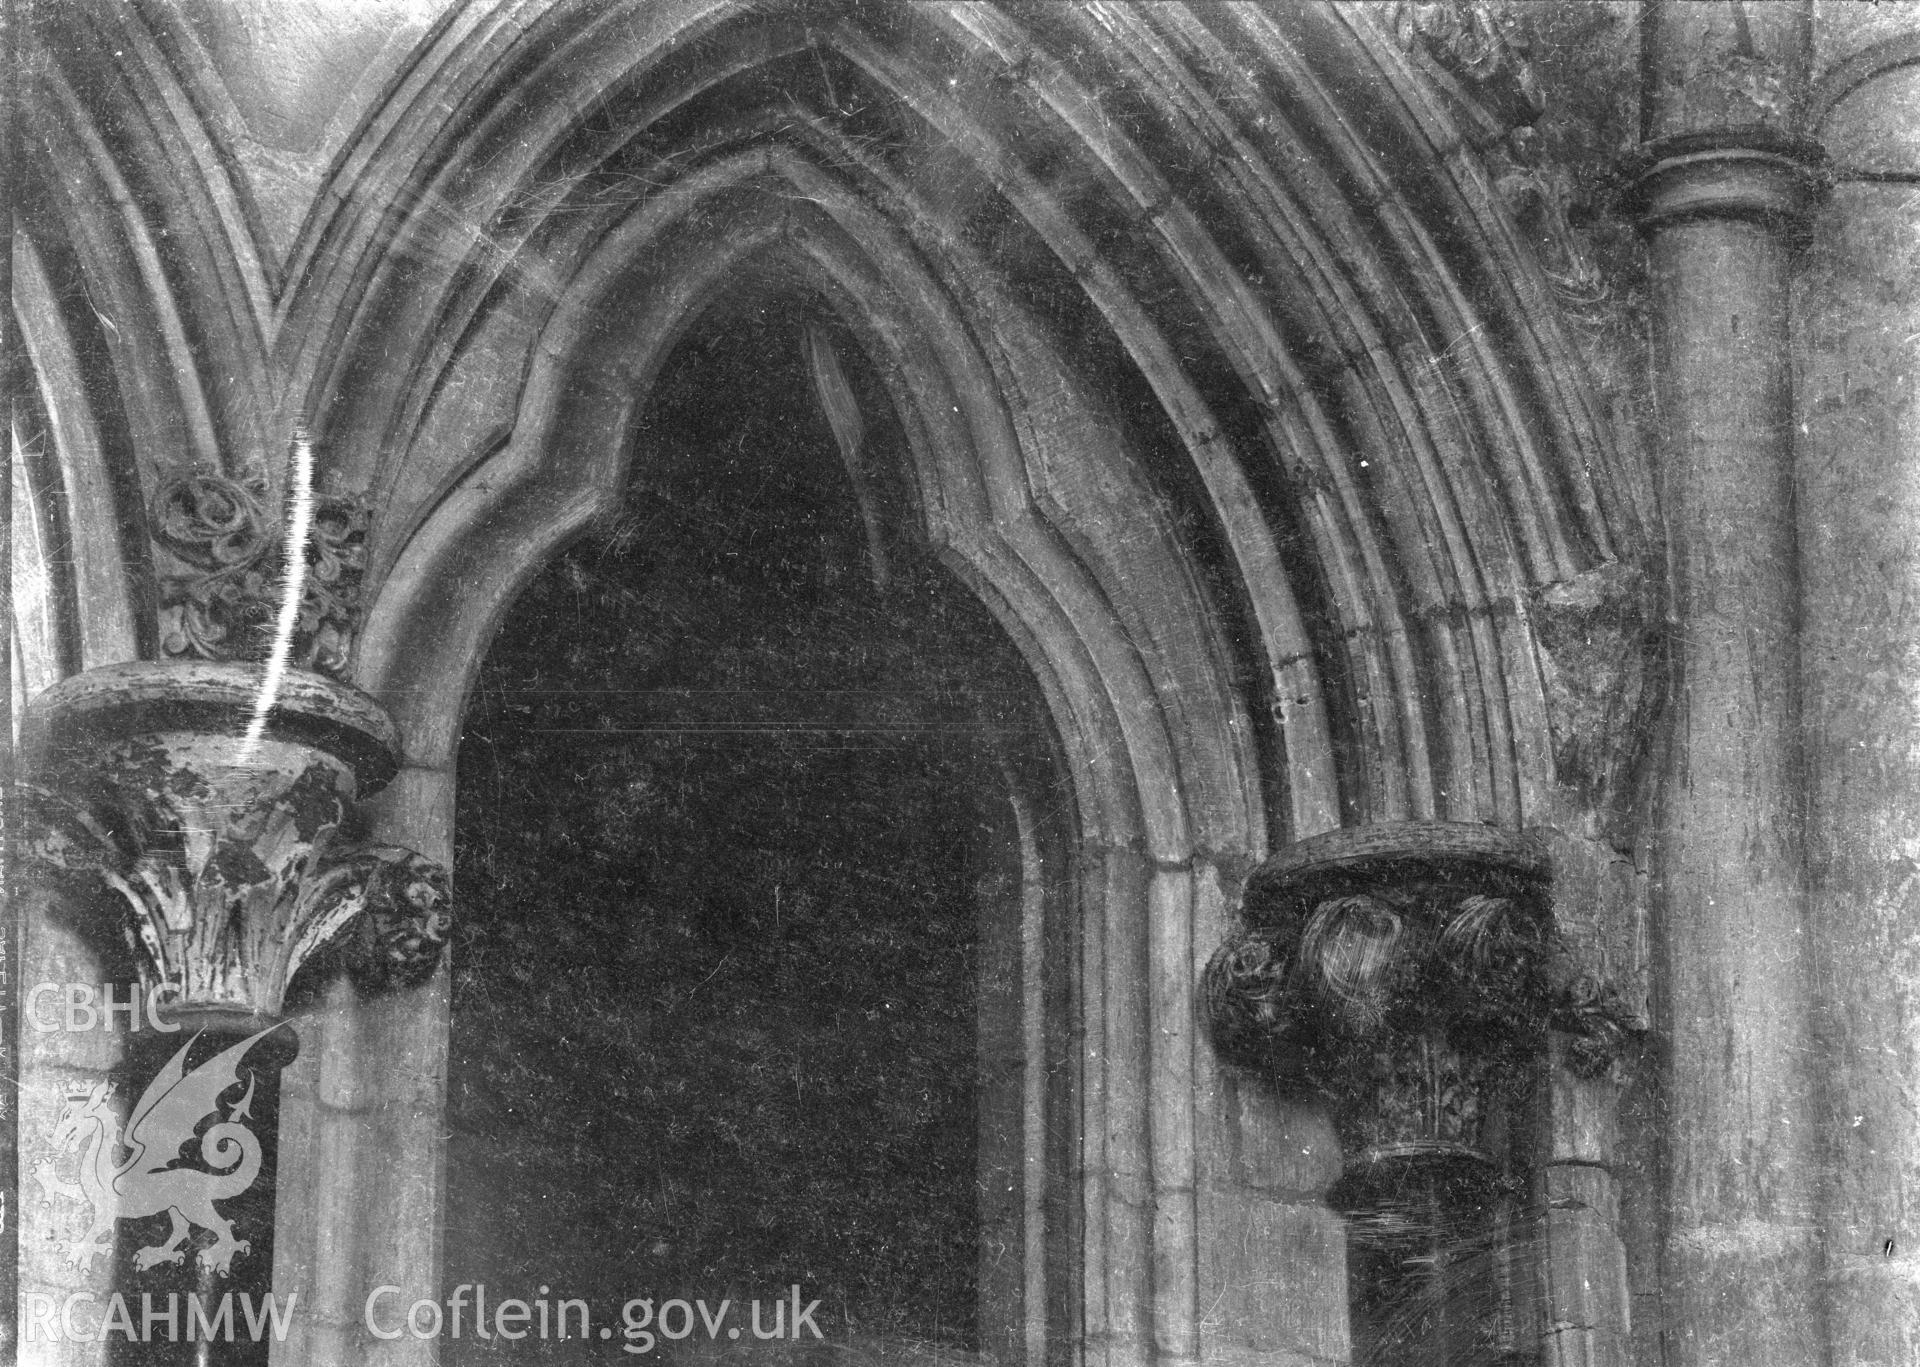 Digital copy of a black and white nitrate negative showing exterior view of entrance to St. David's Cathedral, taken by E.W. Lovegrove, July 1936.